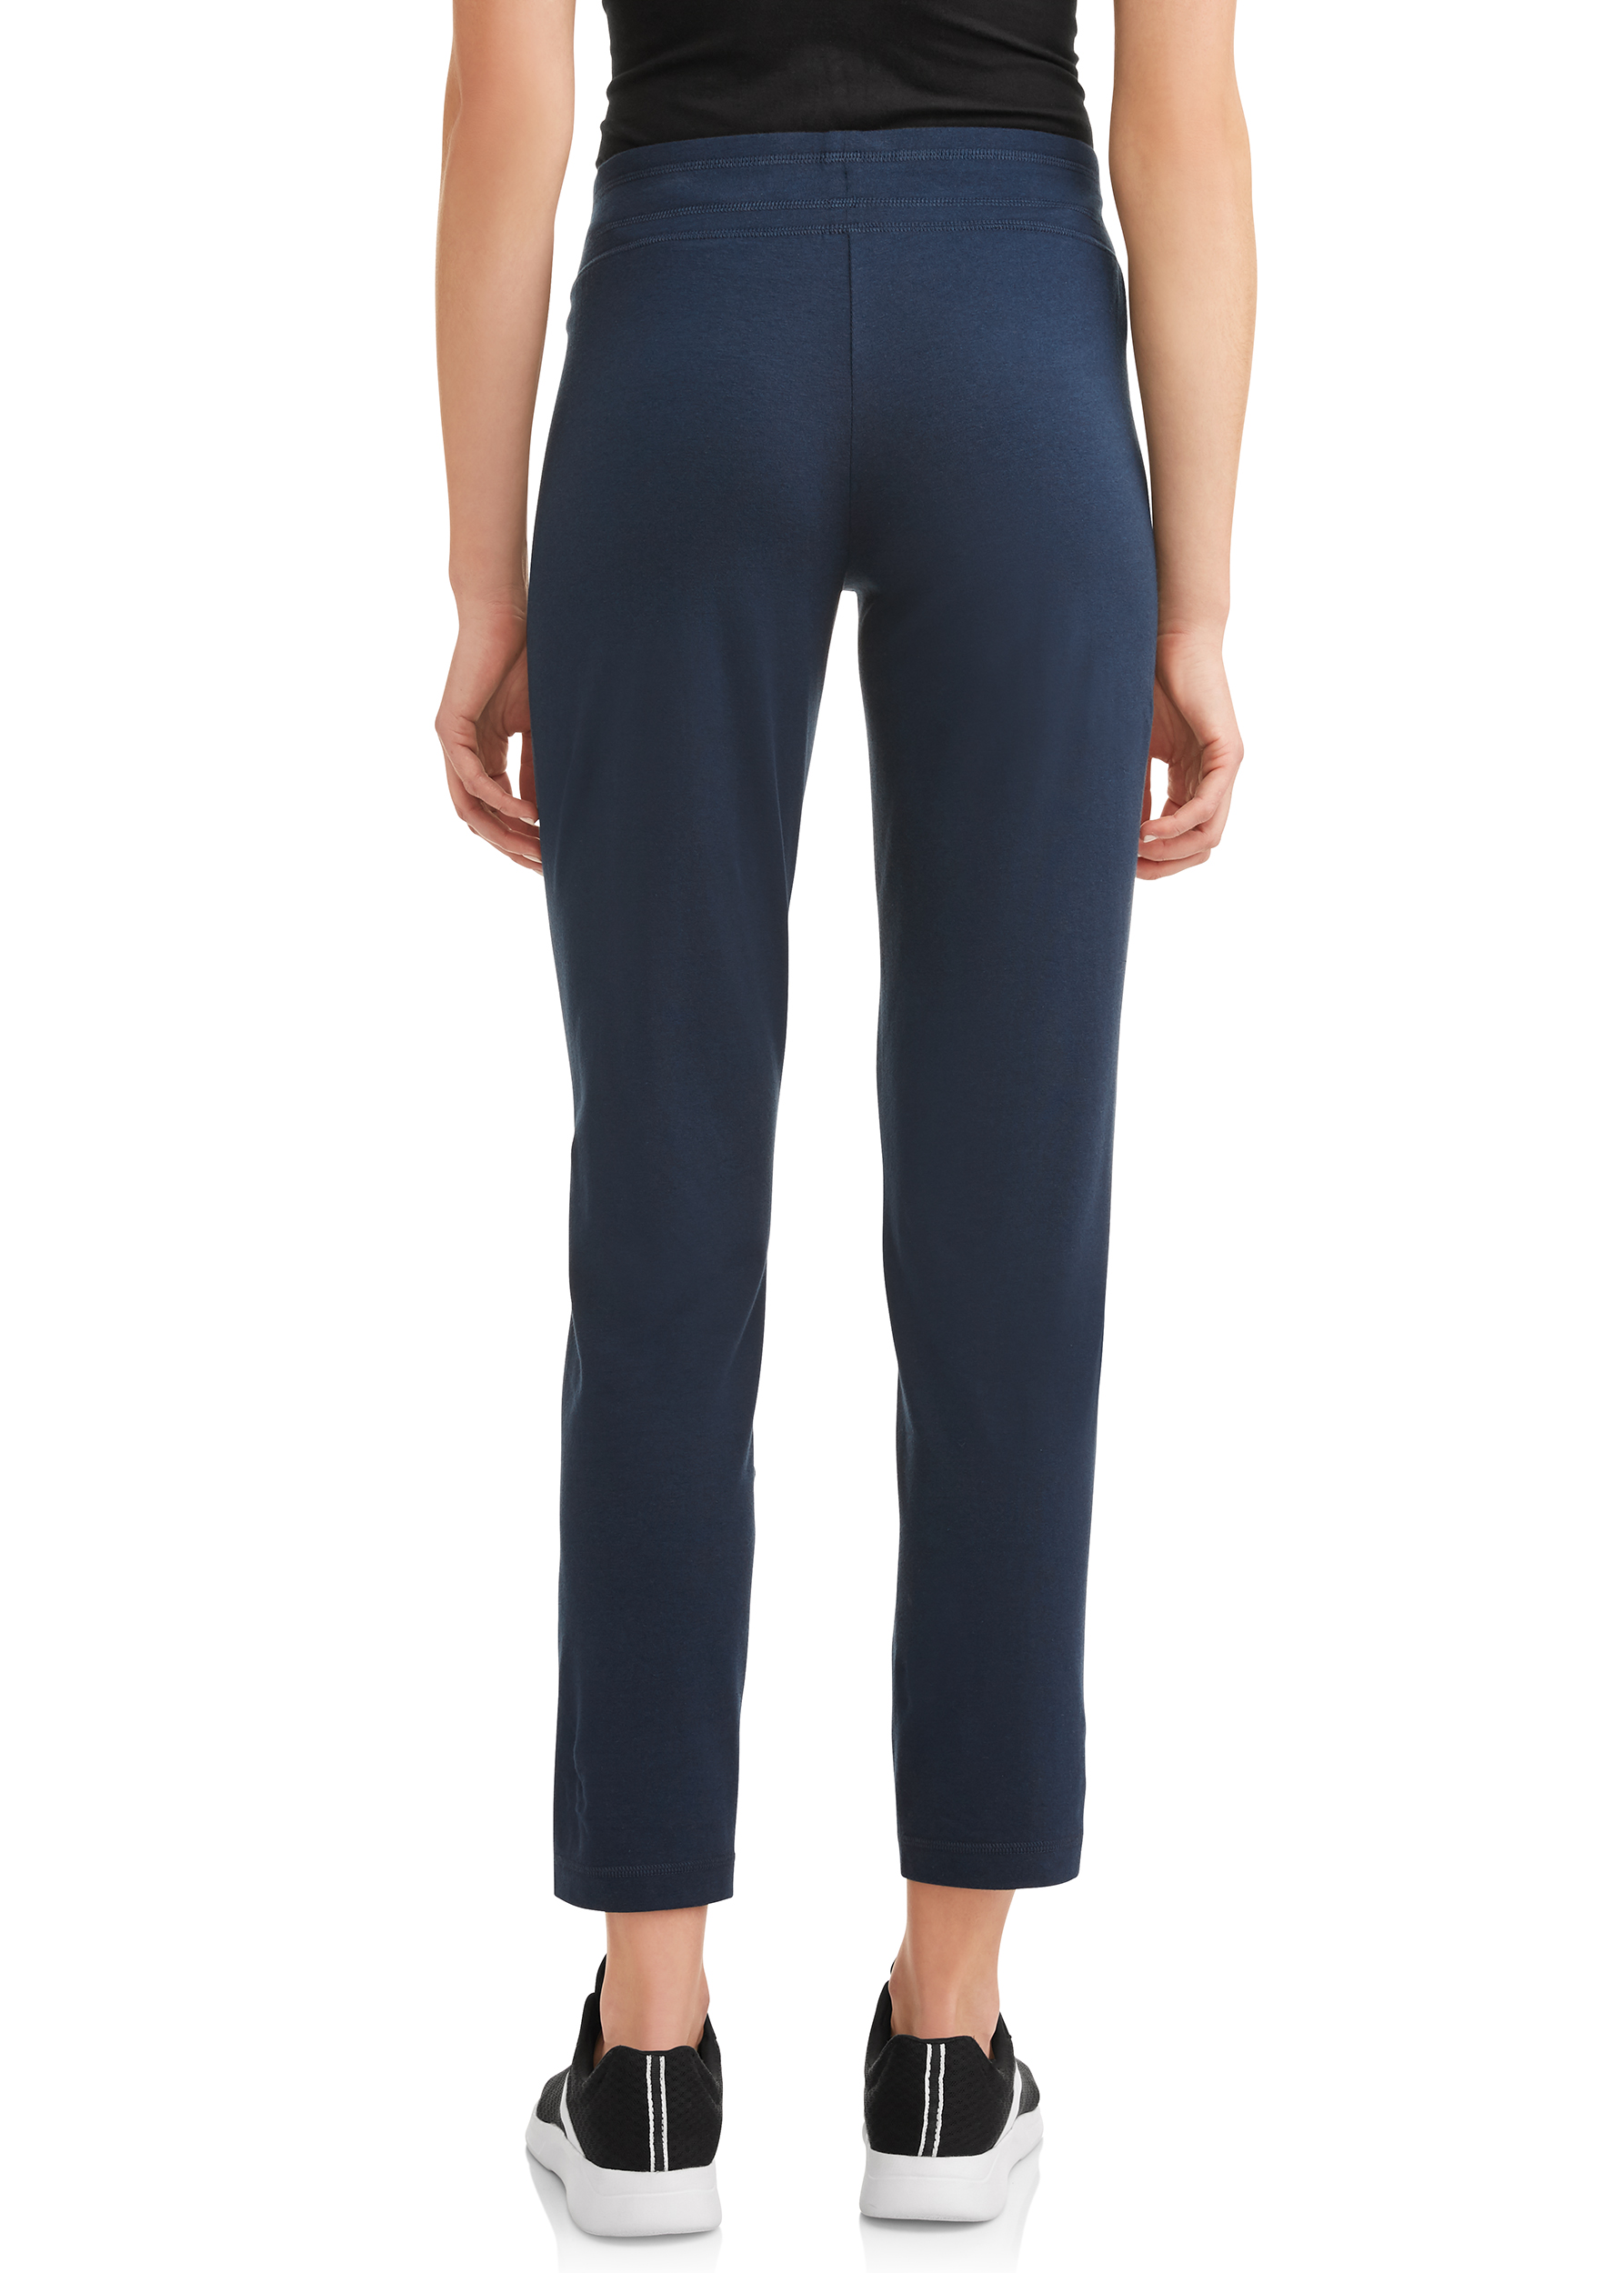 Athletic Works Women's Athleisure Core Knit Pant in Regular and Petite - image 2 of 4